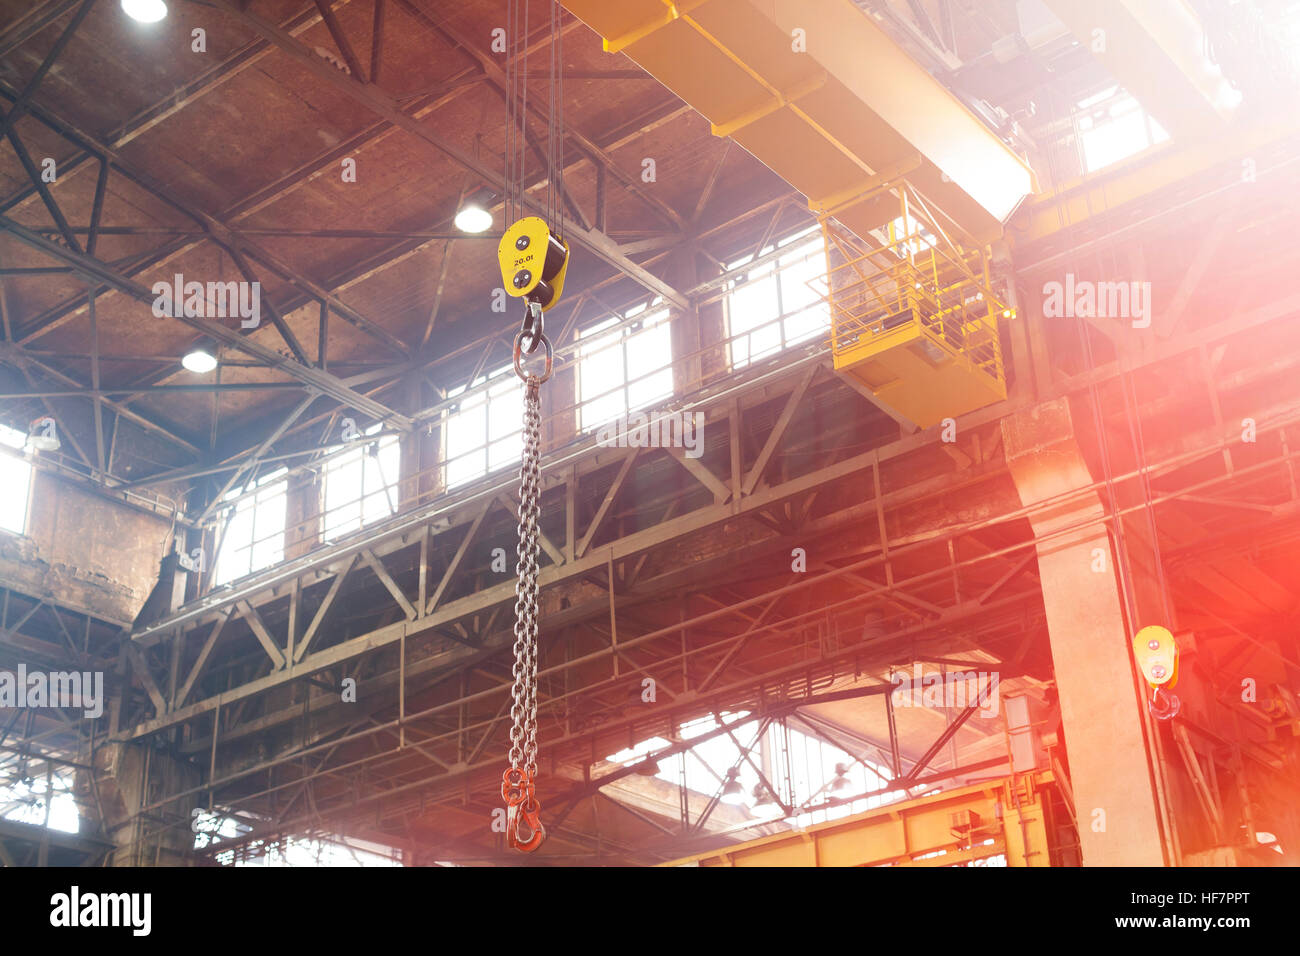 Chain hanging from crane in steel factory Stock Photo